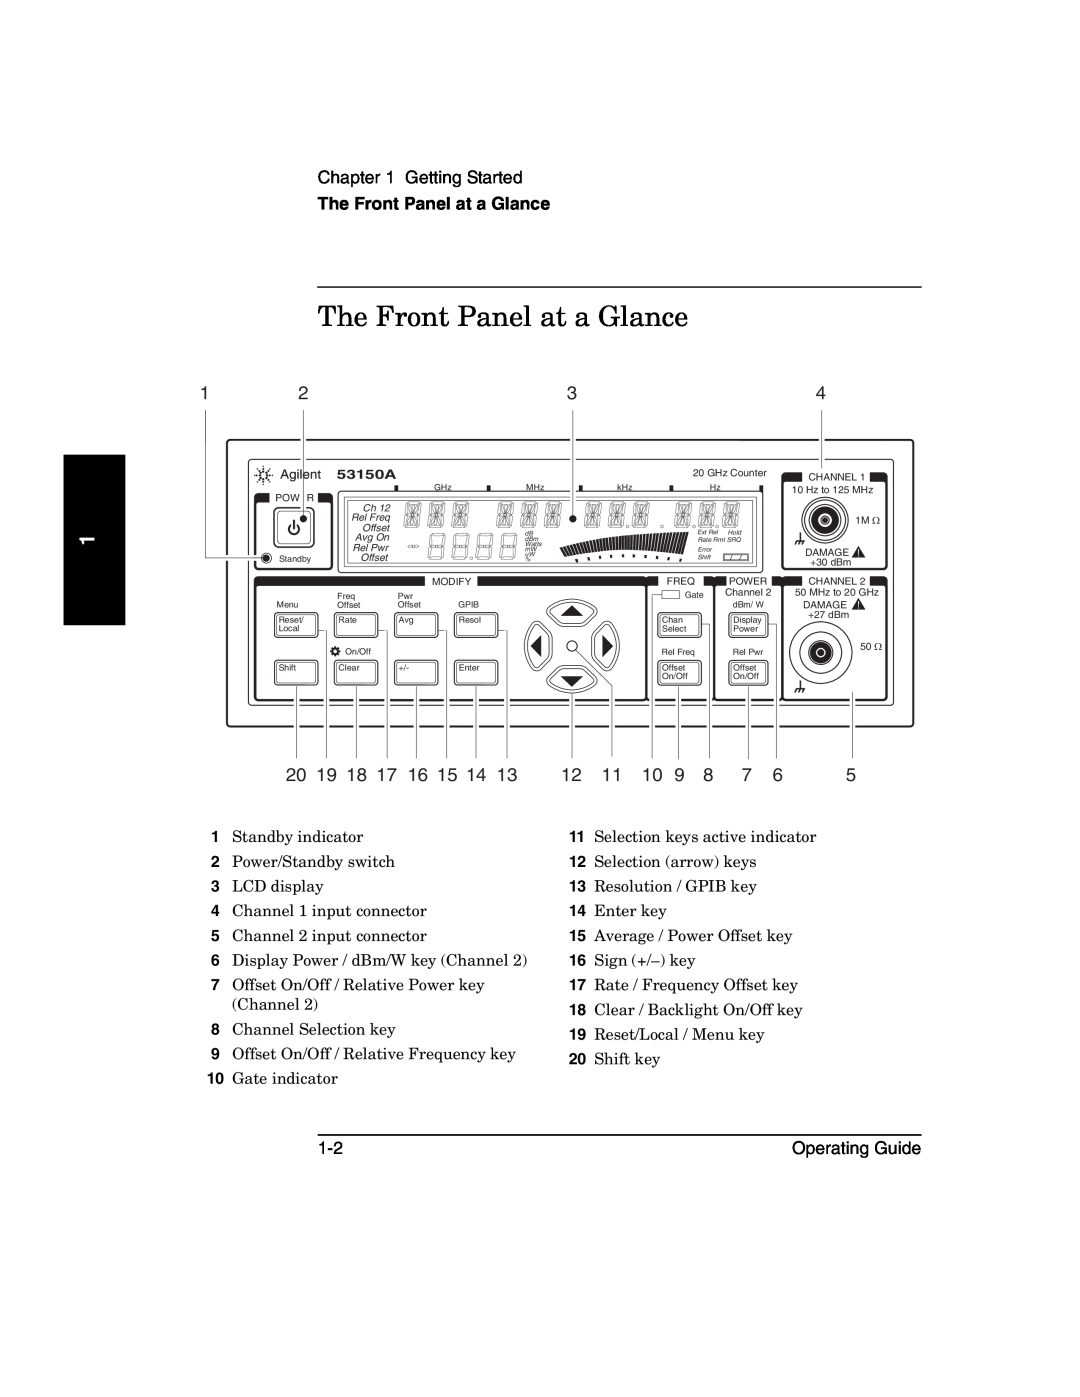 Agilent Technologies 53151A, 53152A manual The Front Panel at a Glance, Getting Started, 20 19 18 17 16 15, Operating Guide 